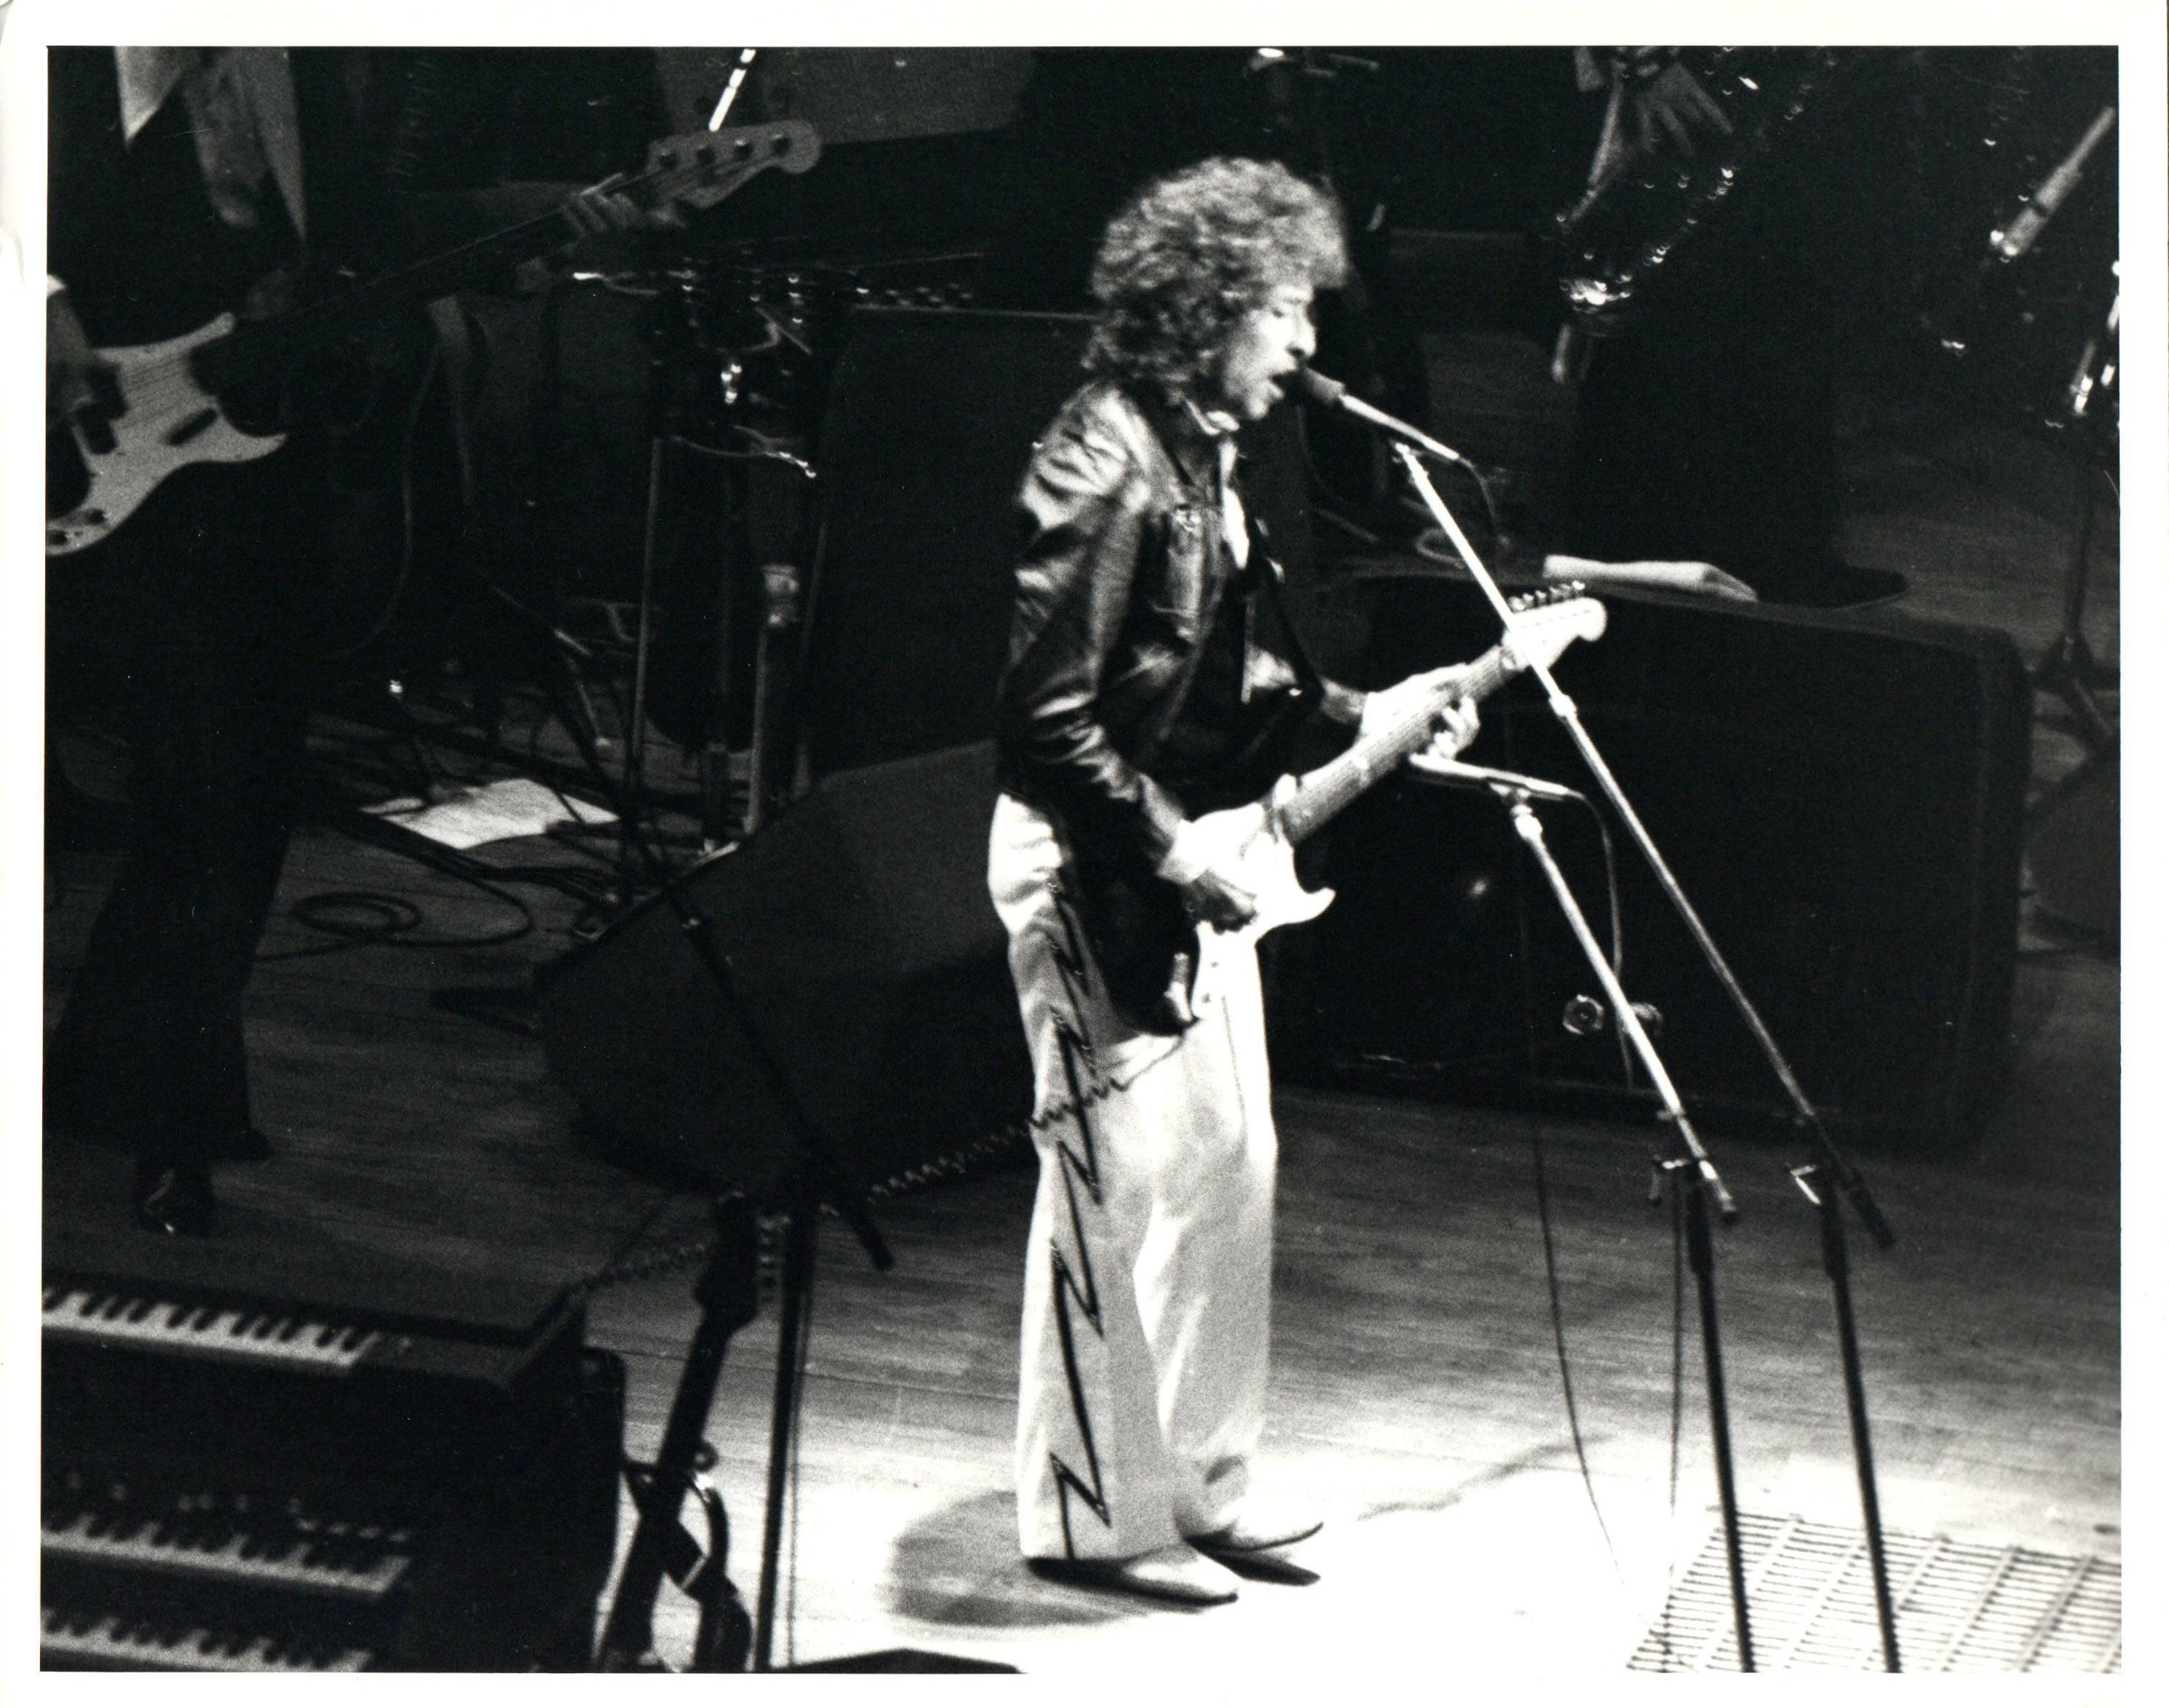 Paul Canty Black and White Photograph - Bob Dylan Playing Guitar on Stage Vintage Original Photograph